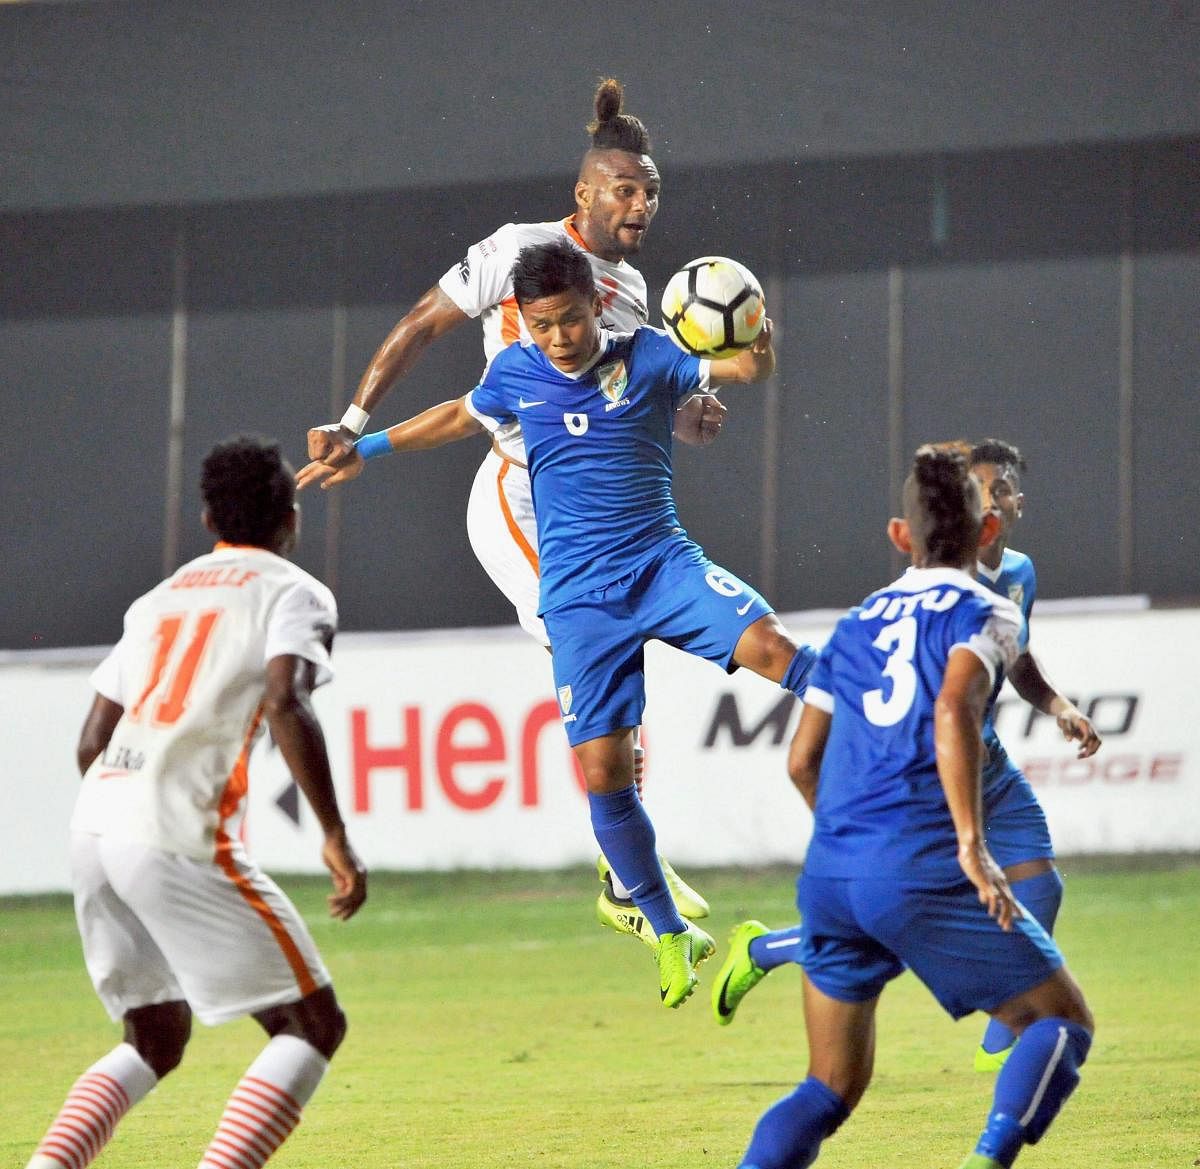 Indian Arrows &amp; Neroca FC in action at Tilak Maidan, in Vasco during the I-League match on Tuesday. (PTI Photo)